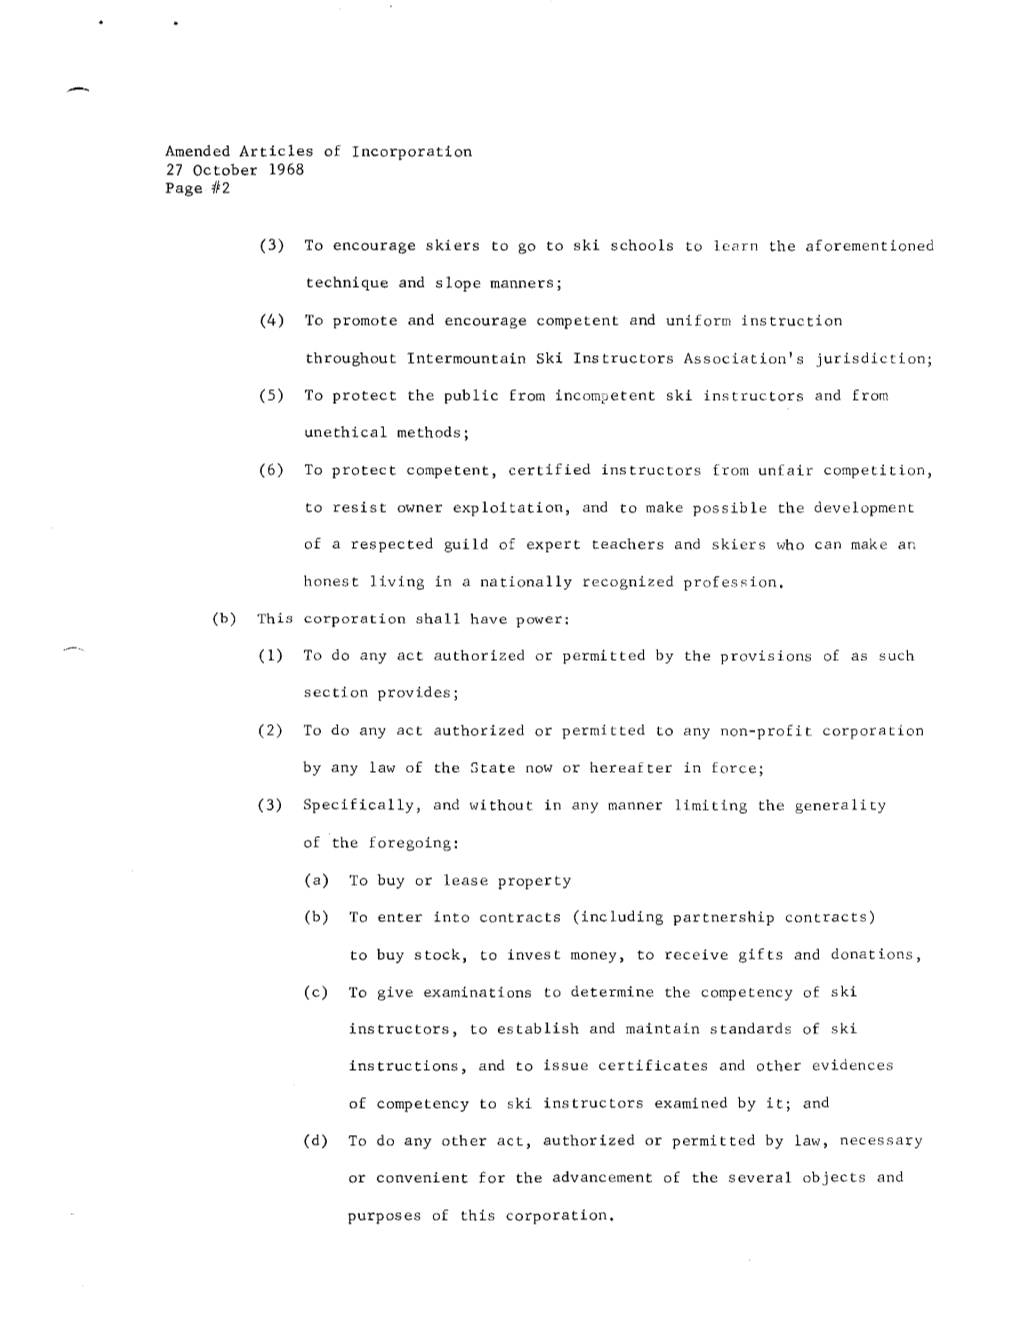 Amended Articles of Incorporation 27 October 1968 Page #2